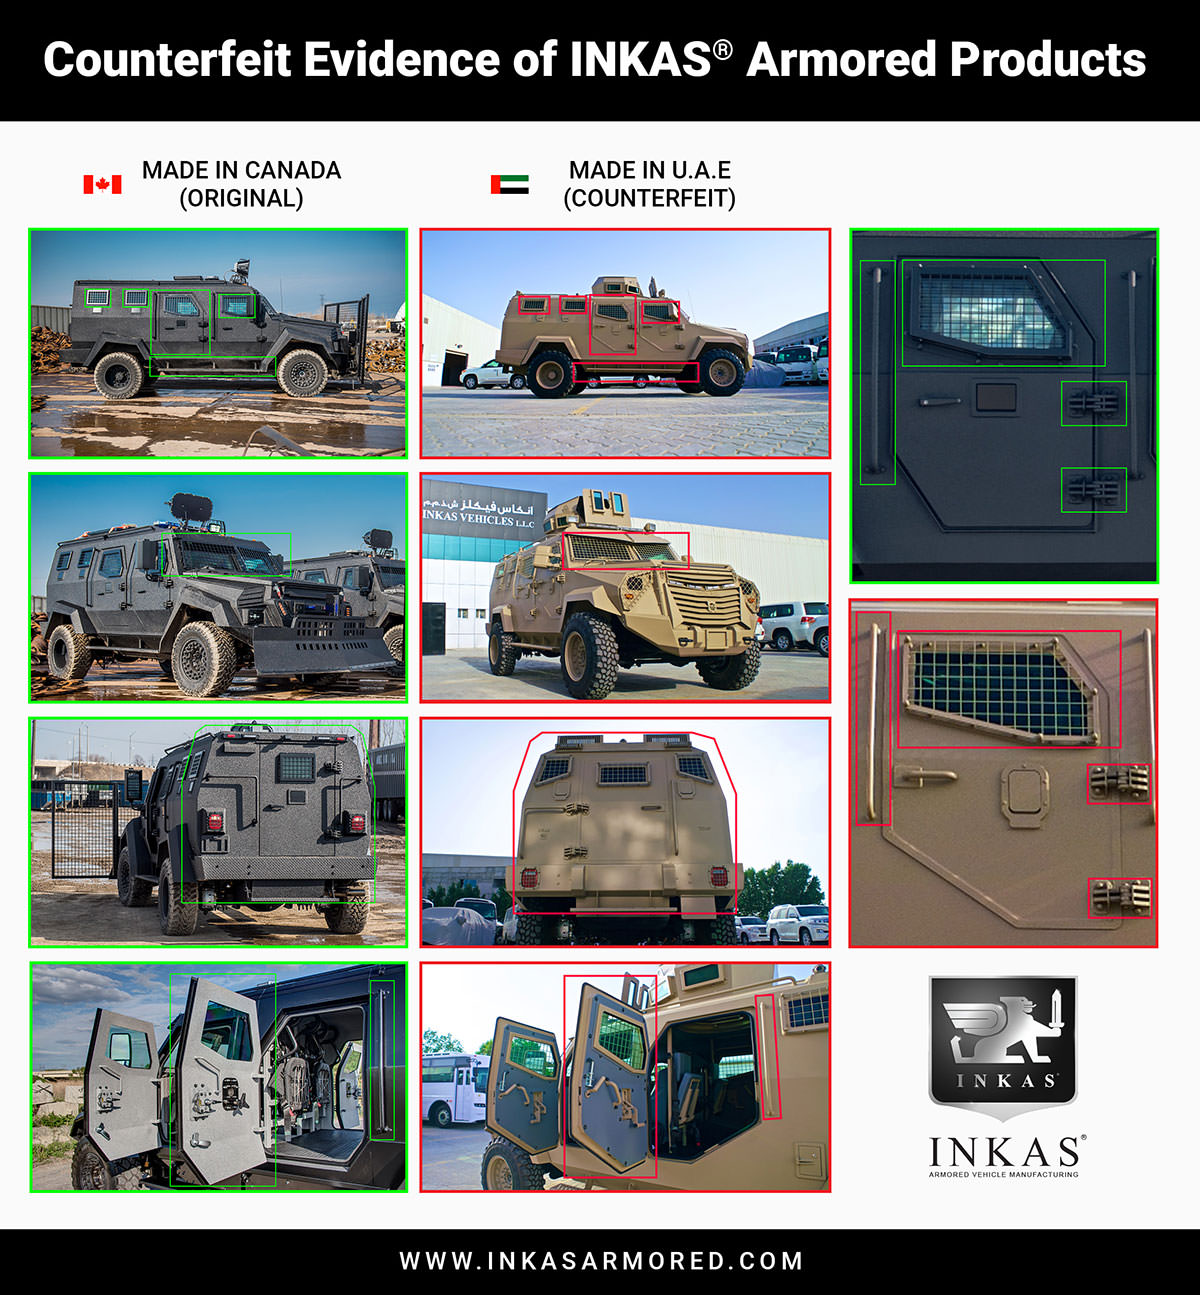 Counterfeit-Evidence-of-INKAS-Armored-Products.jpg